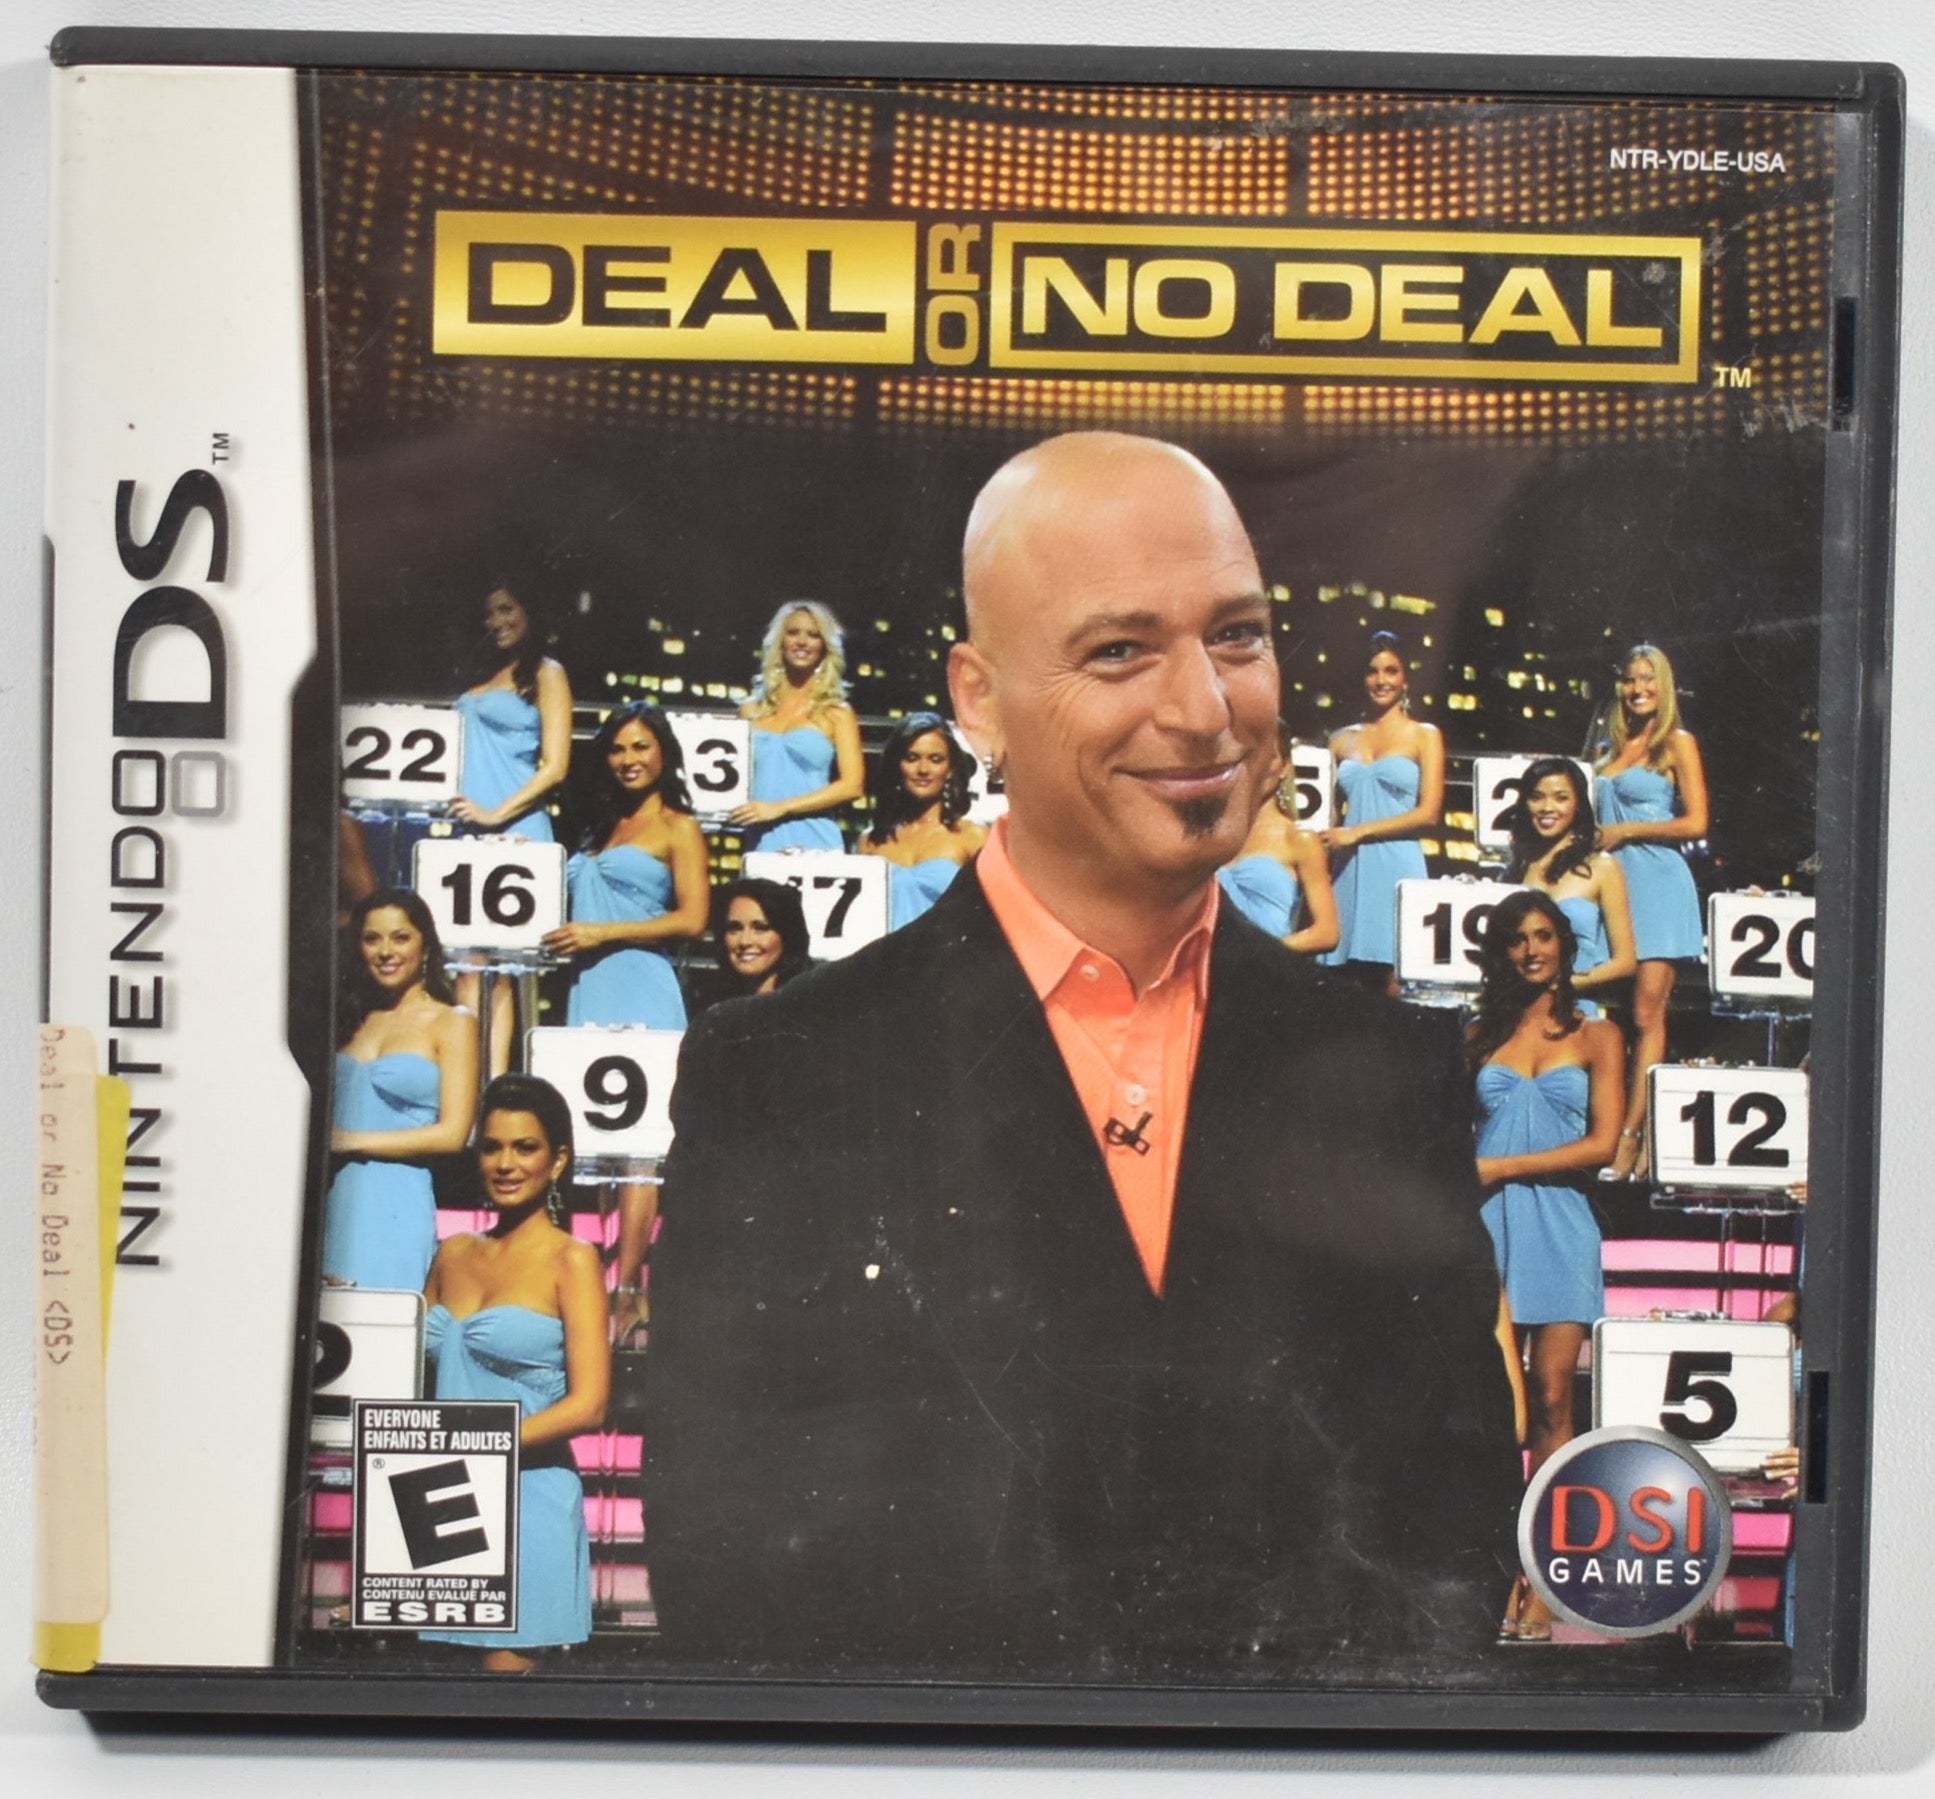 Deal or no deal Nintendo Ds Video Game Used